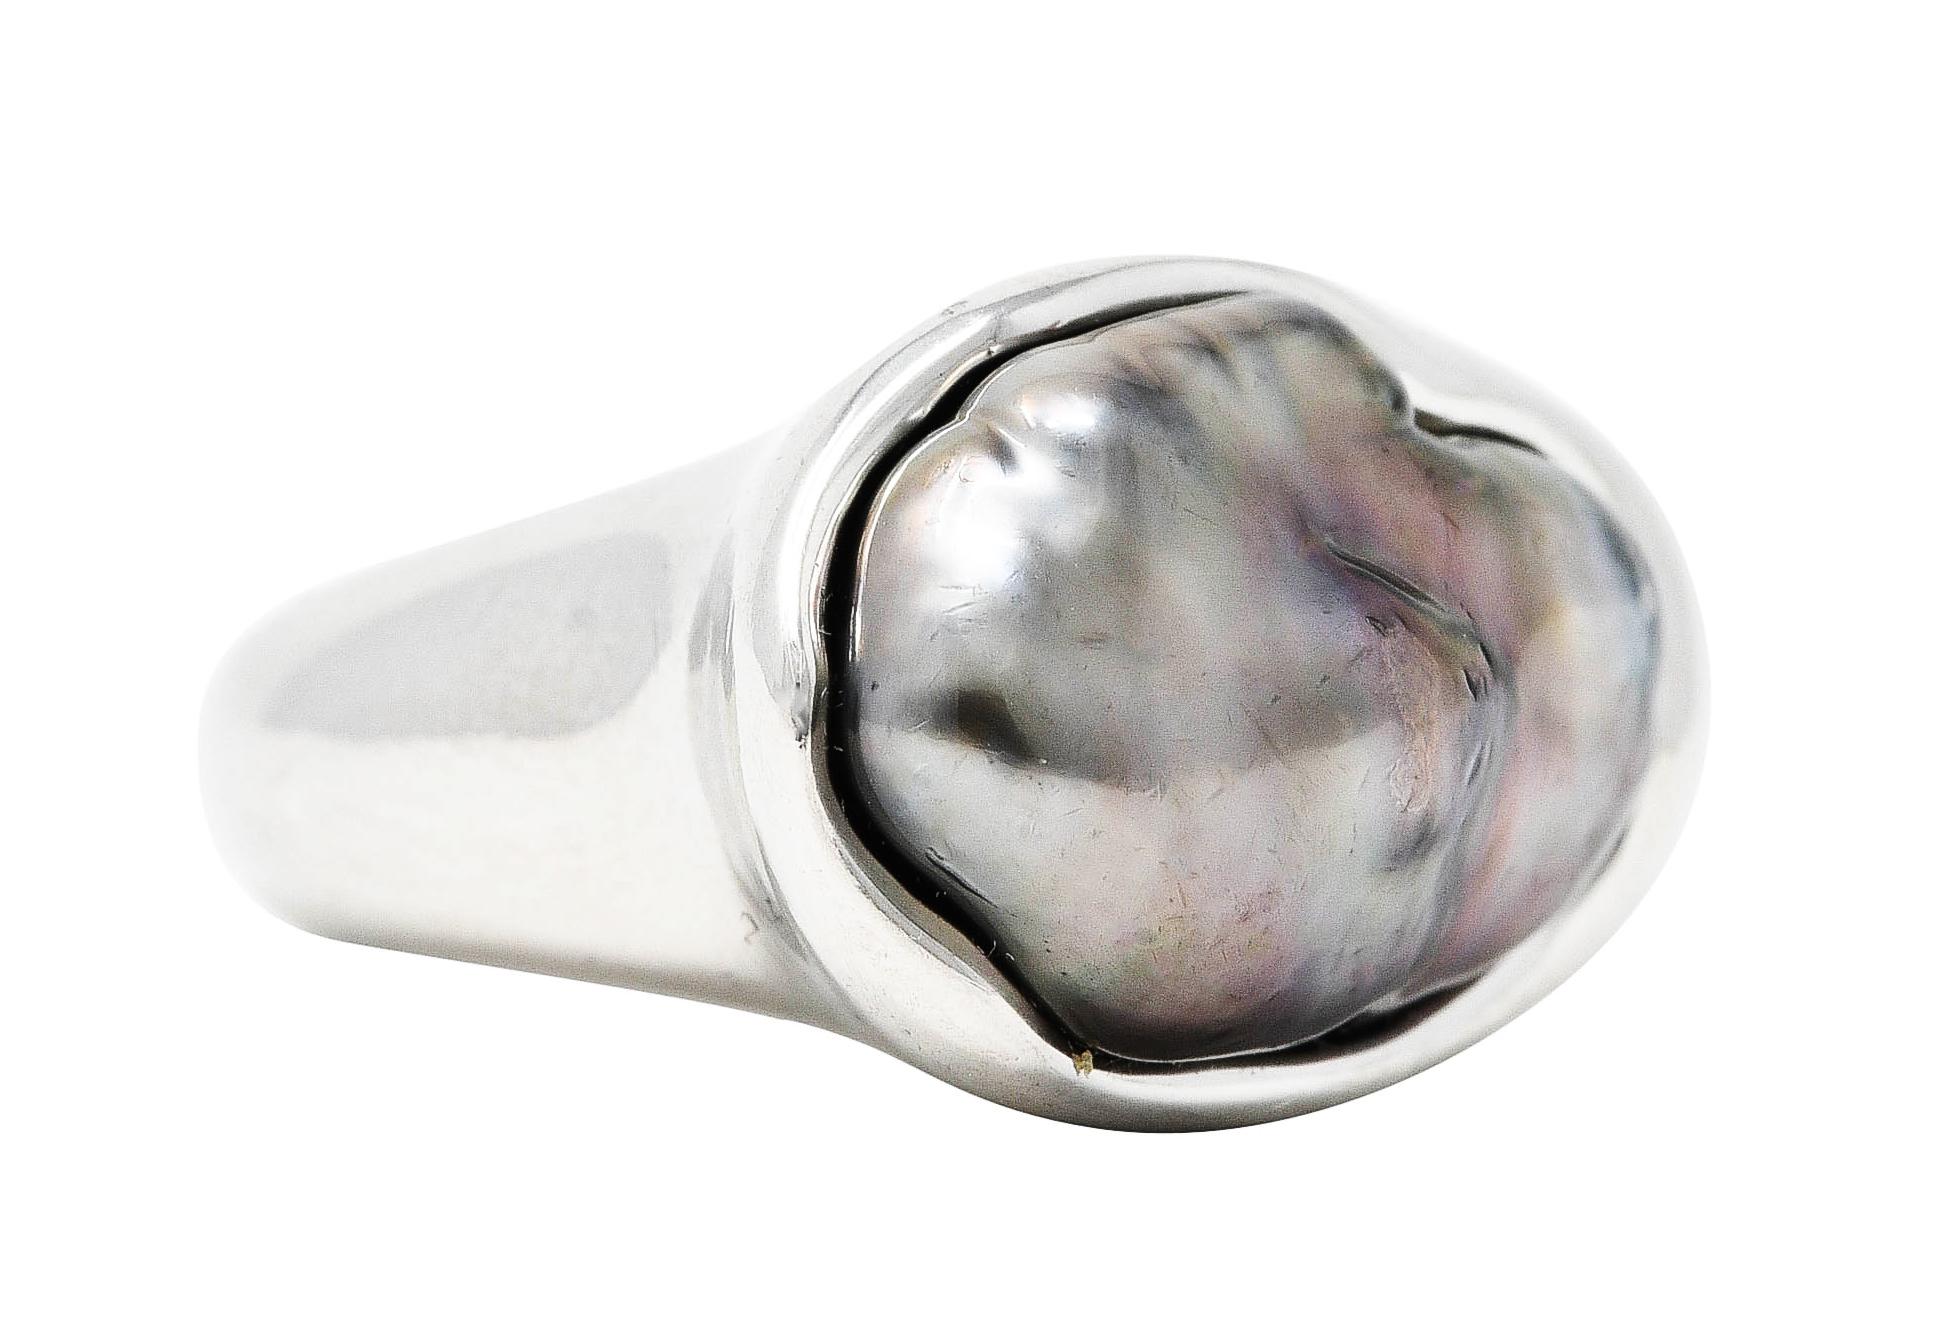 Bold band is organically formed while centering a baroque Tahitian pearl

Gray in body color with strong iridescence and excellent luster

Set low and surrounded by a waved but polished platinum edge

Stamped PT950 for platinum

Signed Peretti and